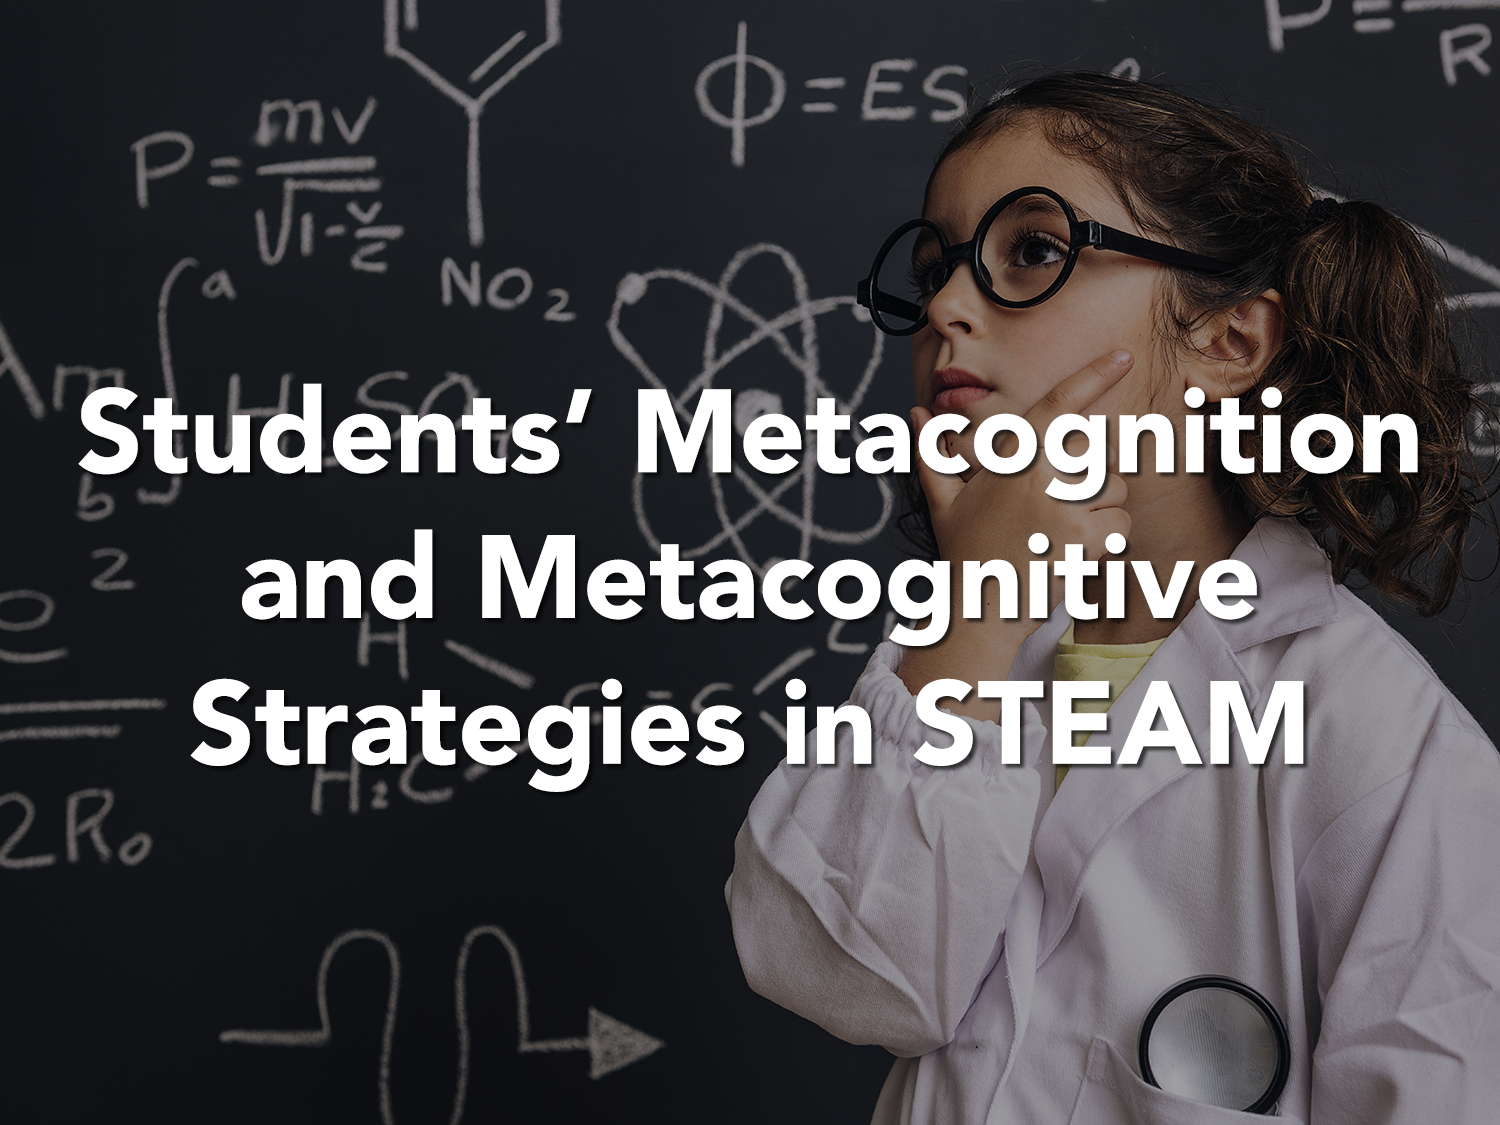 Students' Metacognition and Metacognitive Strategies in STEAM